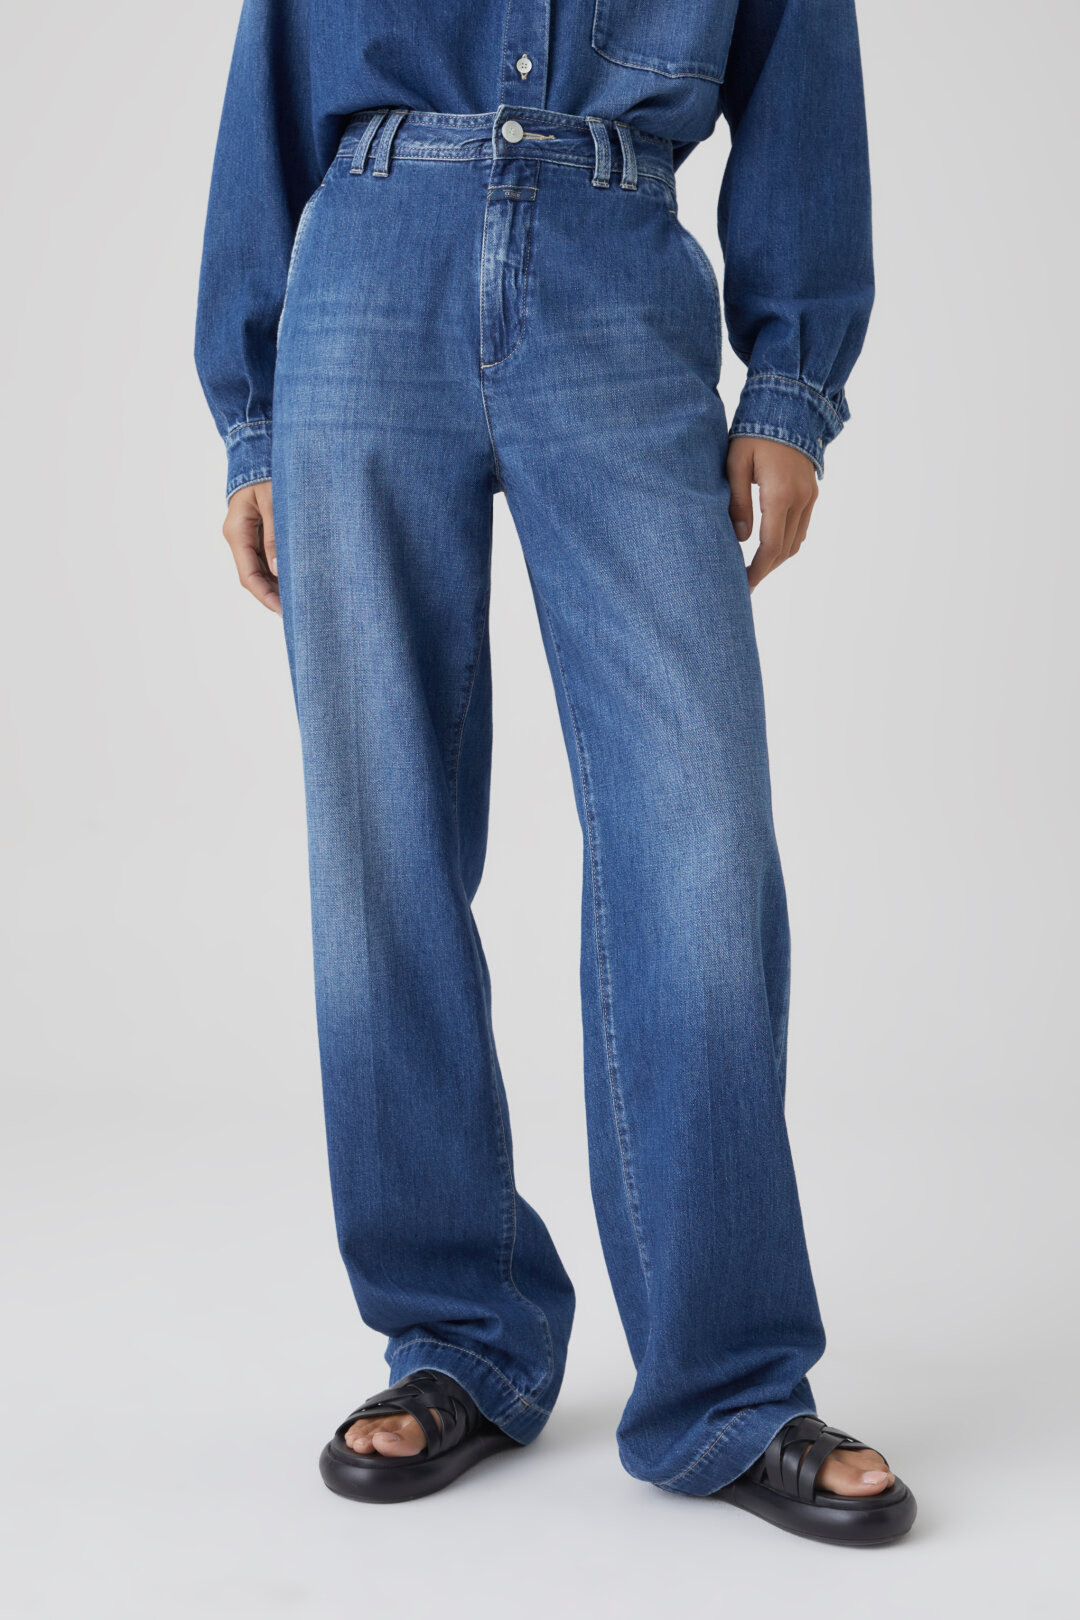 Closed Braden Jeans Blue Washed